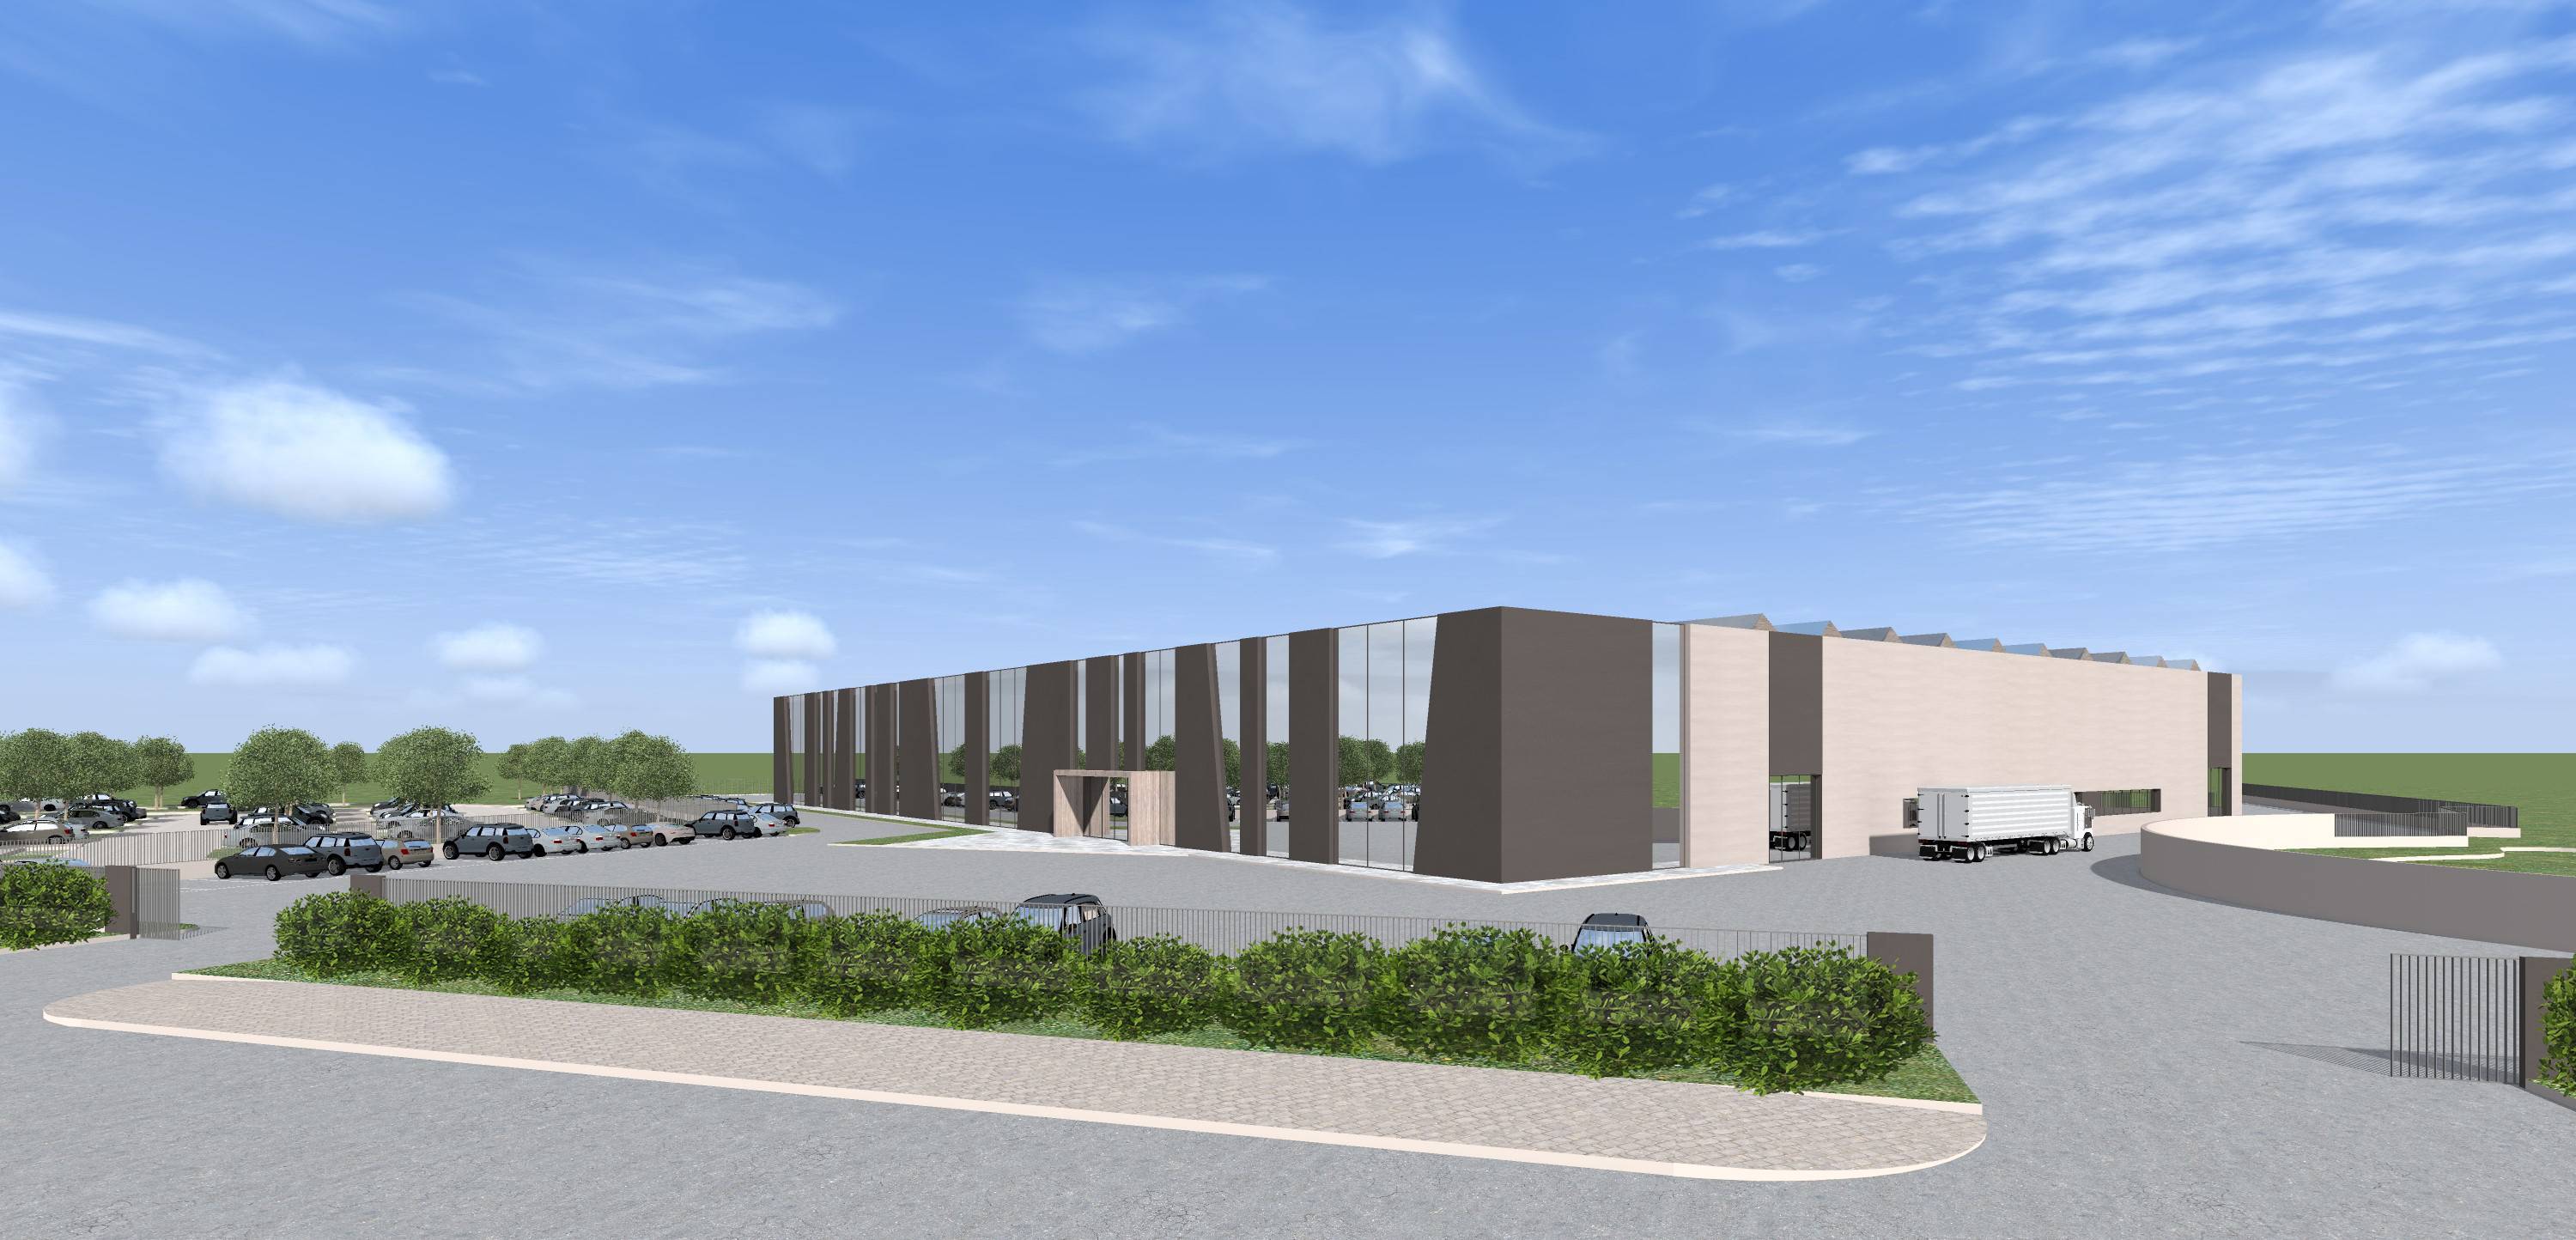 INCREDIBLE OPPORTUNITY TO BUILD A MULTI-USE CENTER NEAR THE BOLOGNA AIRPORT